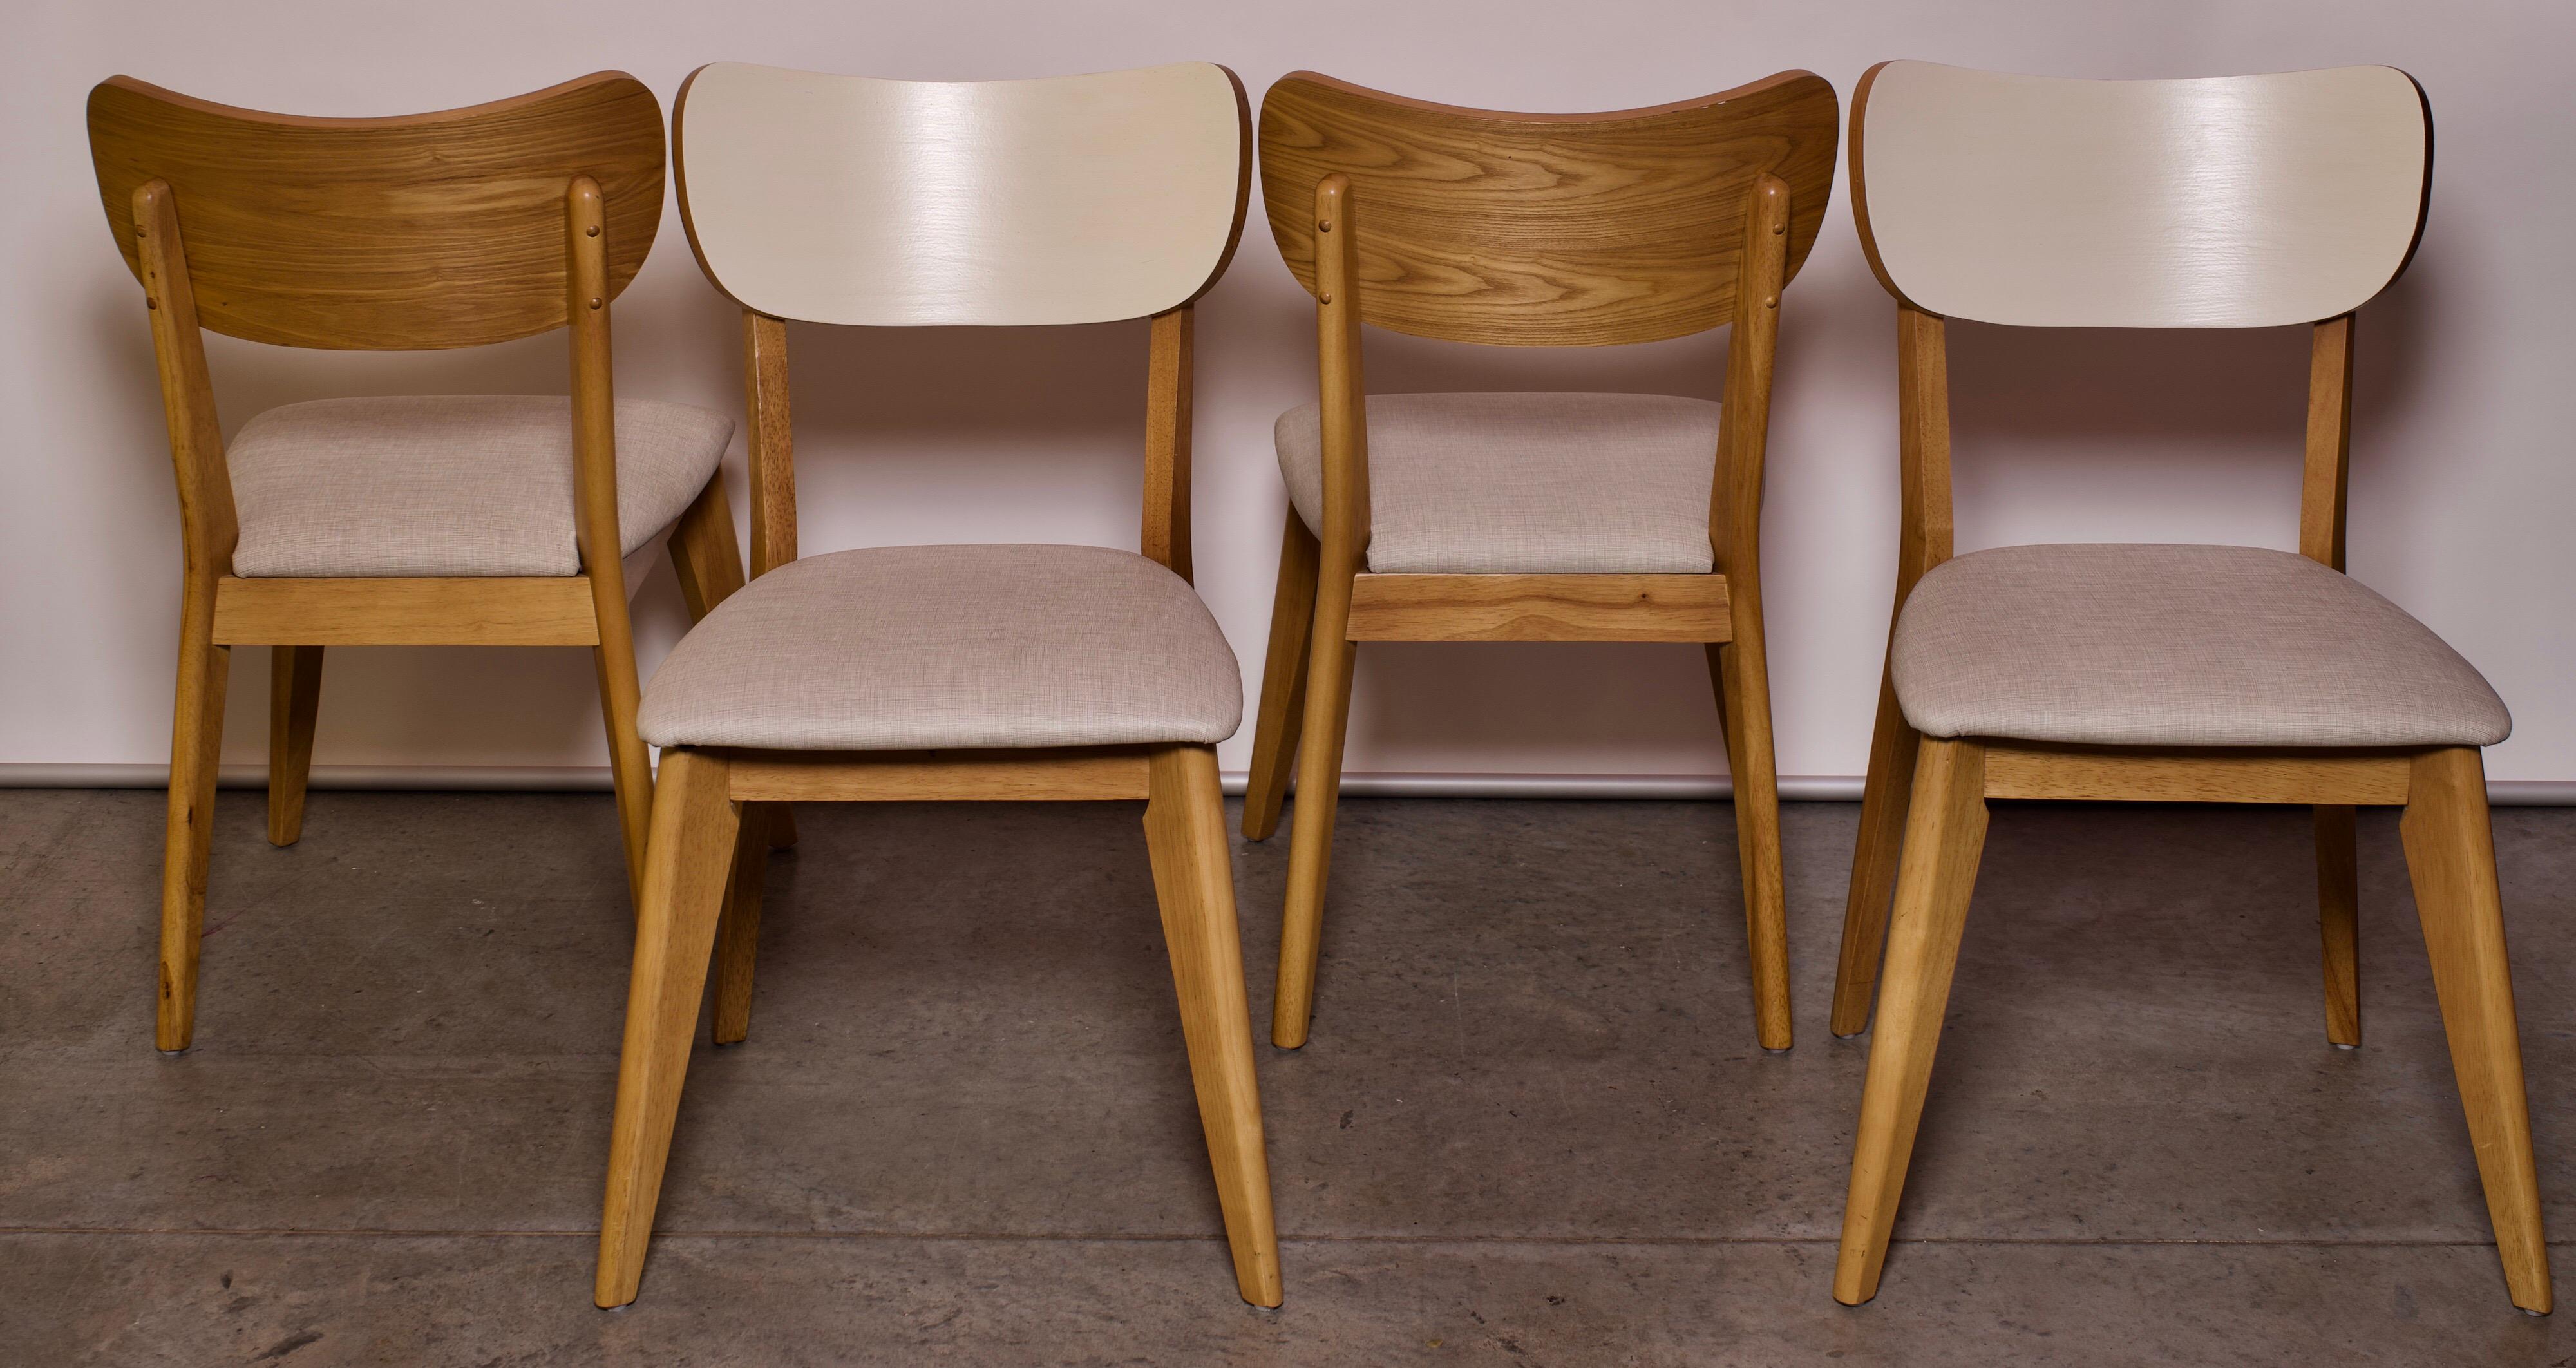 1960s Vintage Contemporary Birch and Vinyl Dining Chairs, Set of 4 1